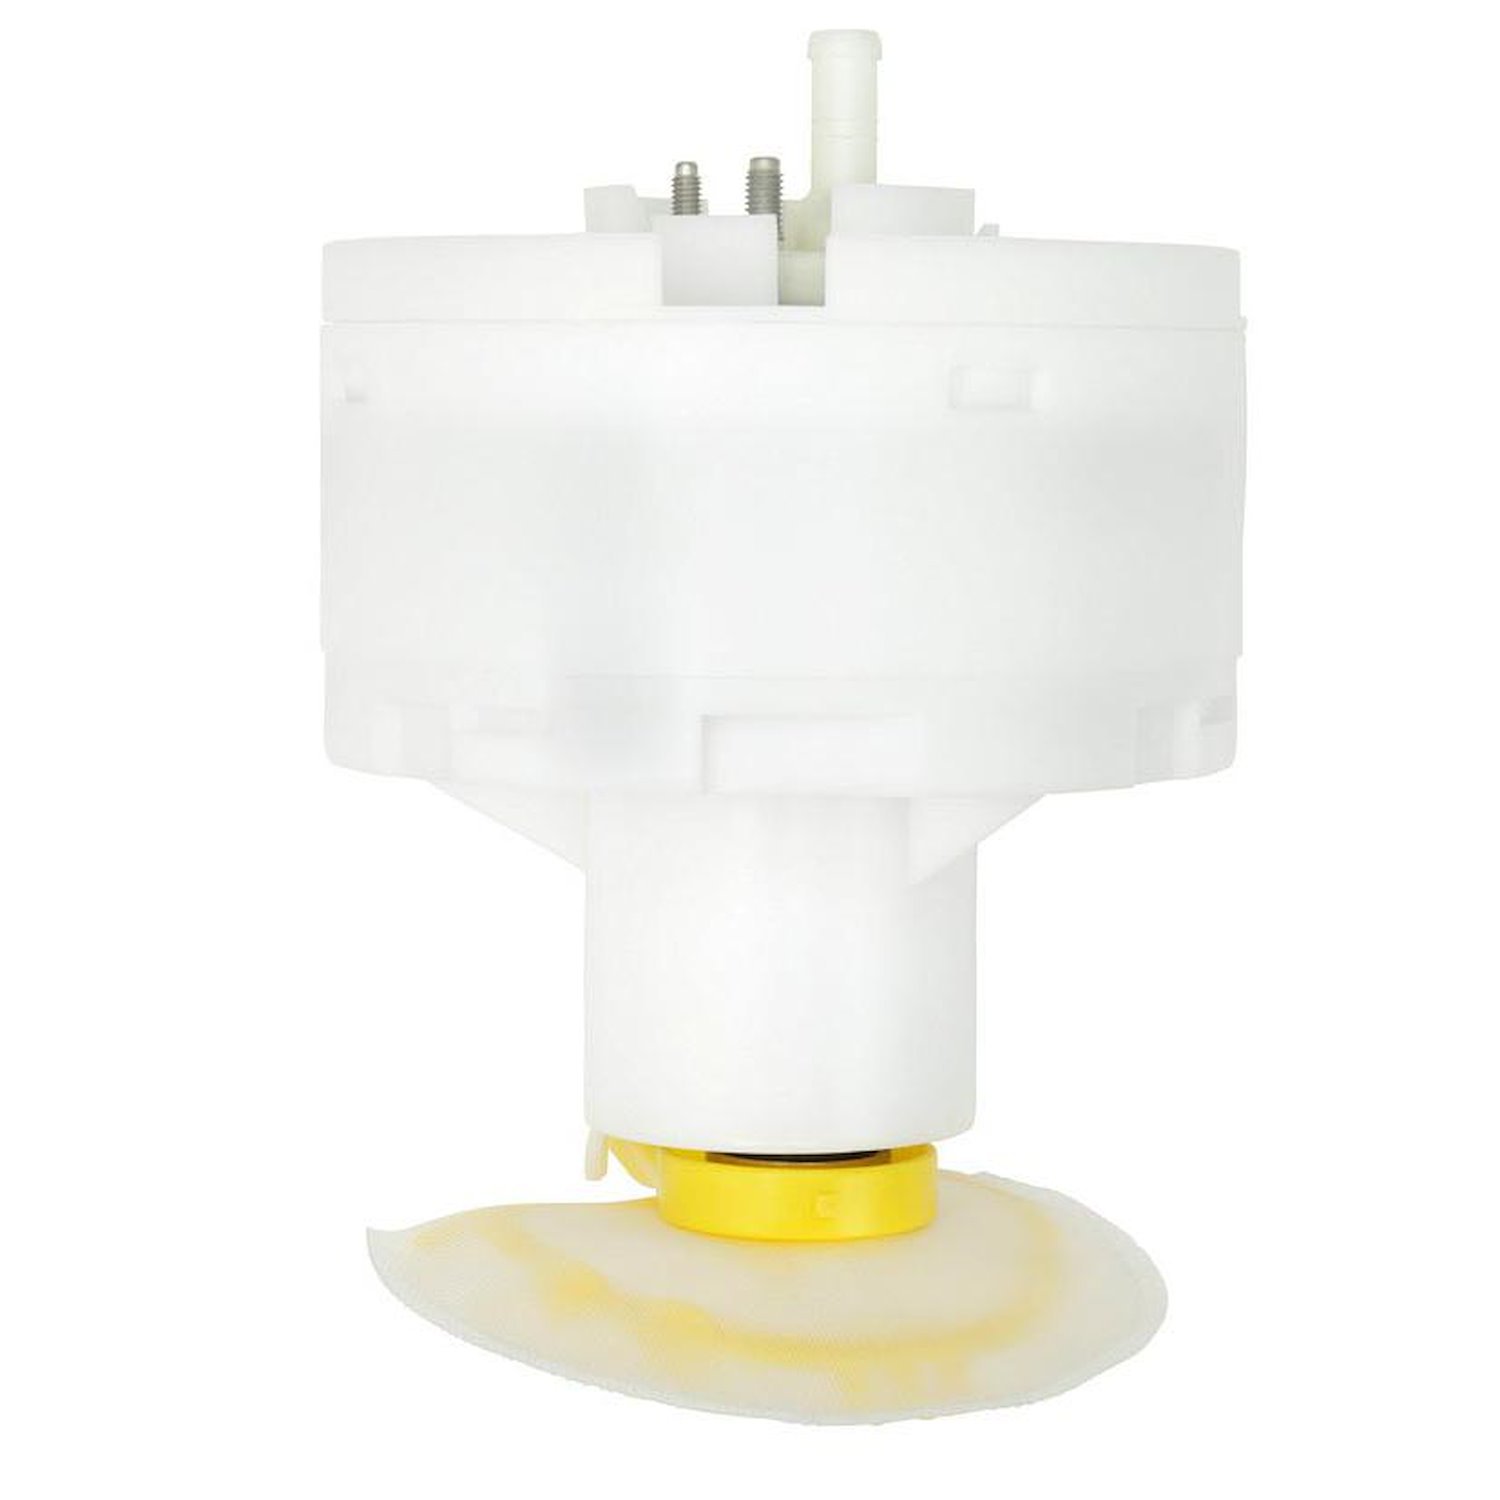 OE Replacement Electric Fuel Pump Module Assembly for 1996-2001 Audi A4/2000 Audi S4